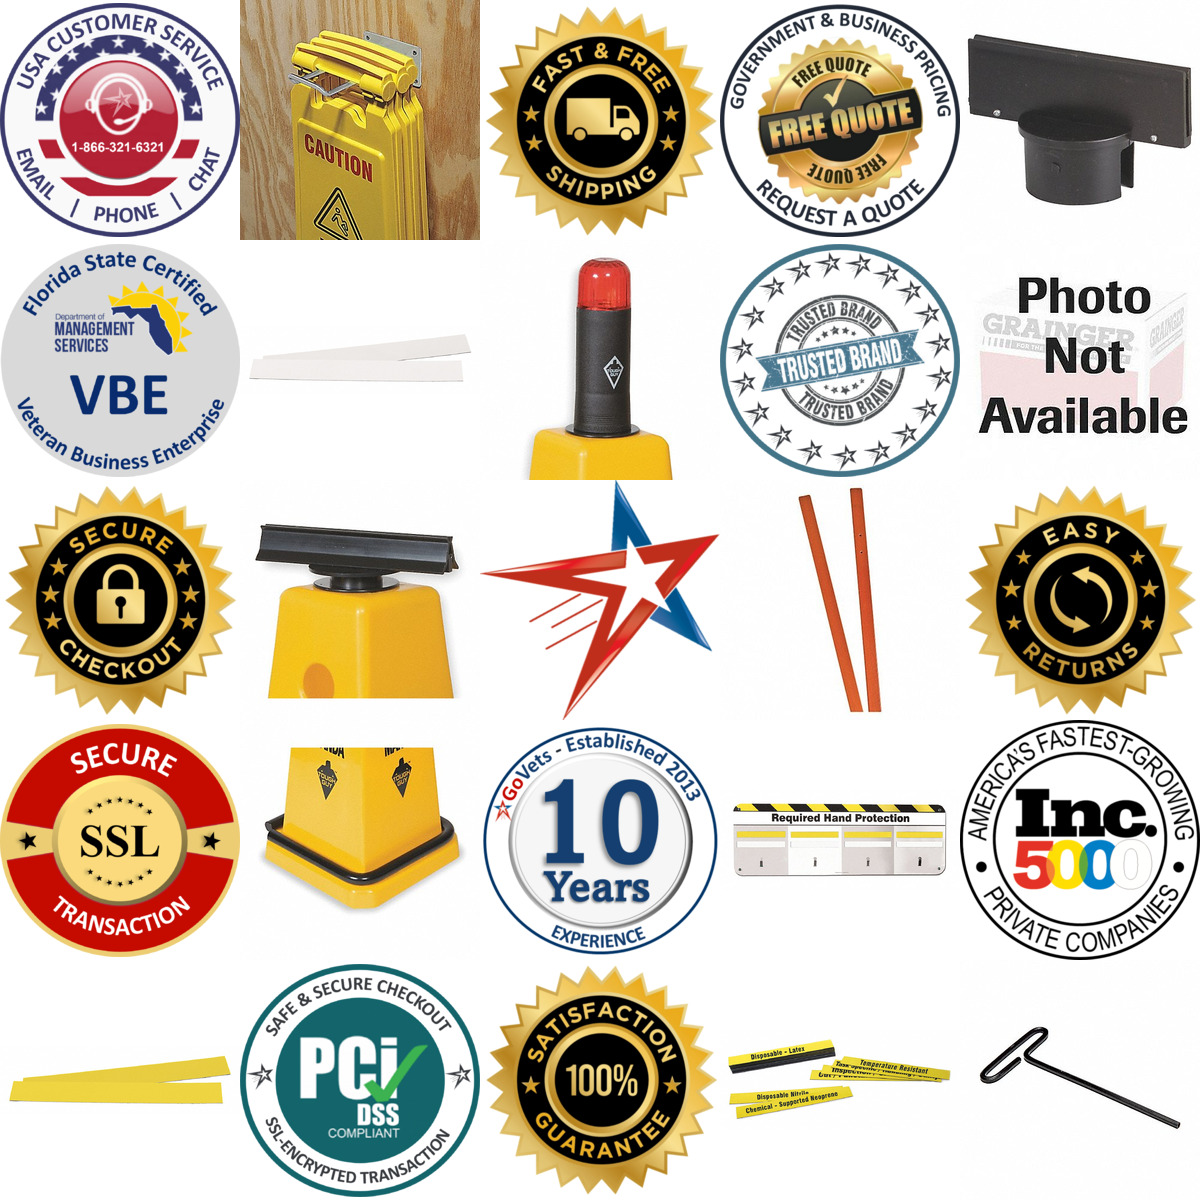 A selection of Sign and Post Accessories products on GoVets